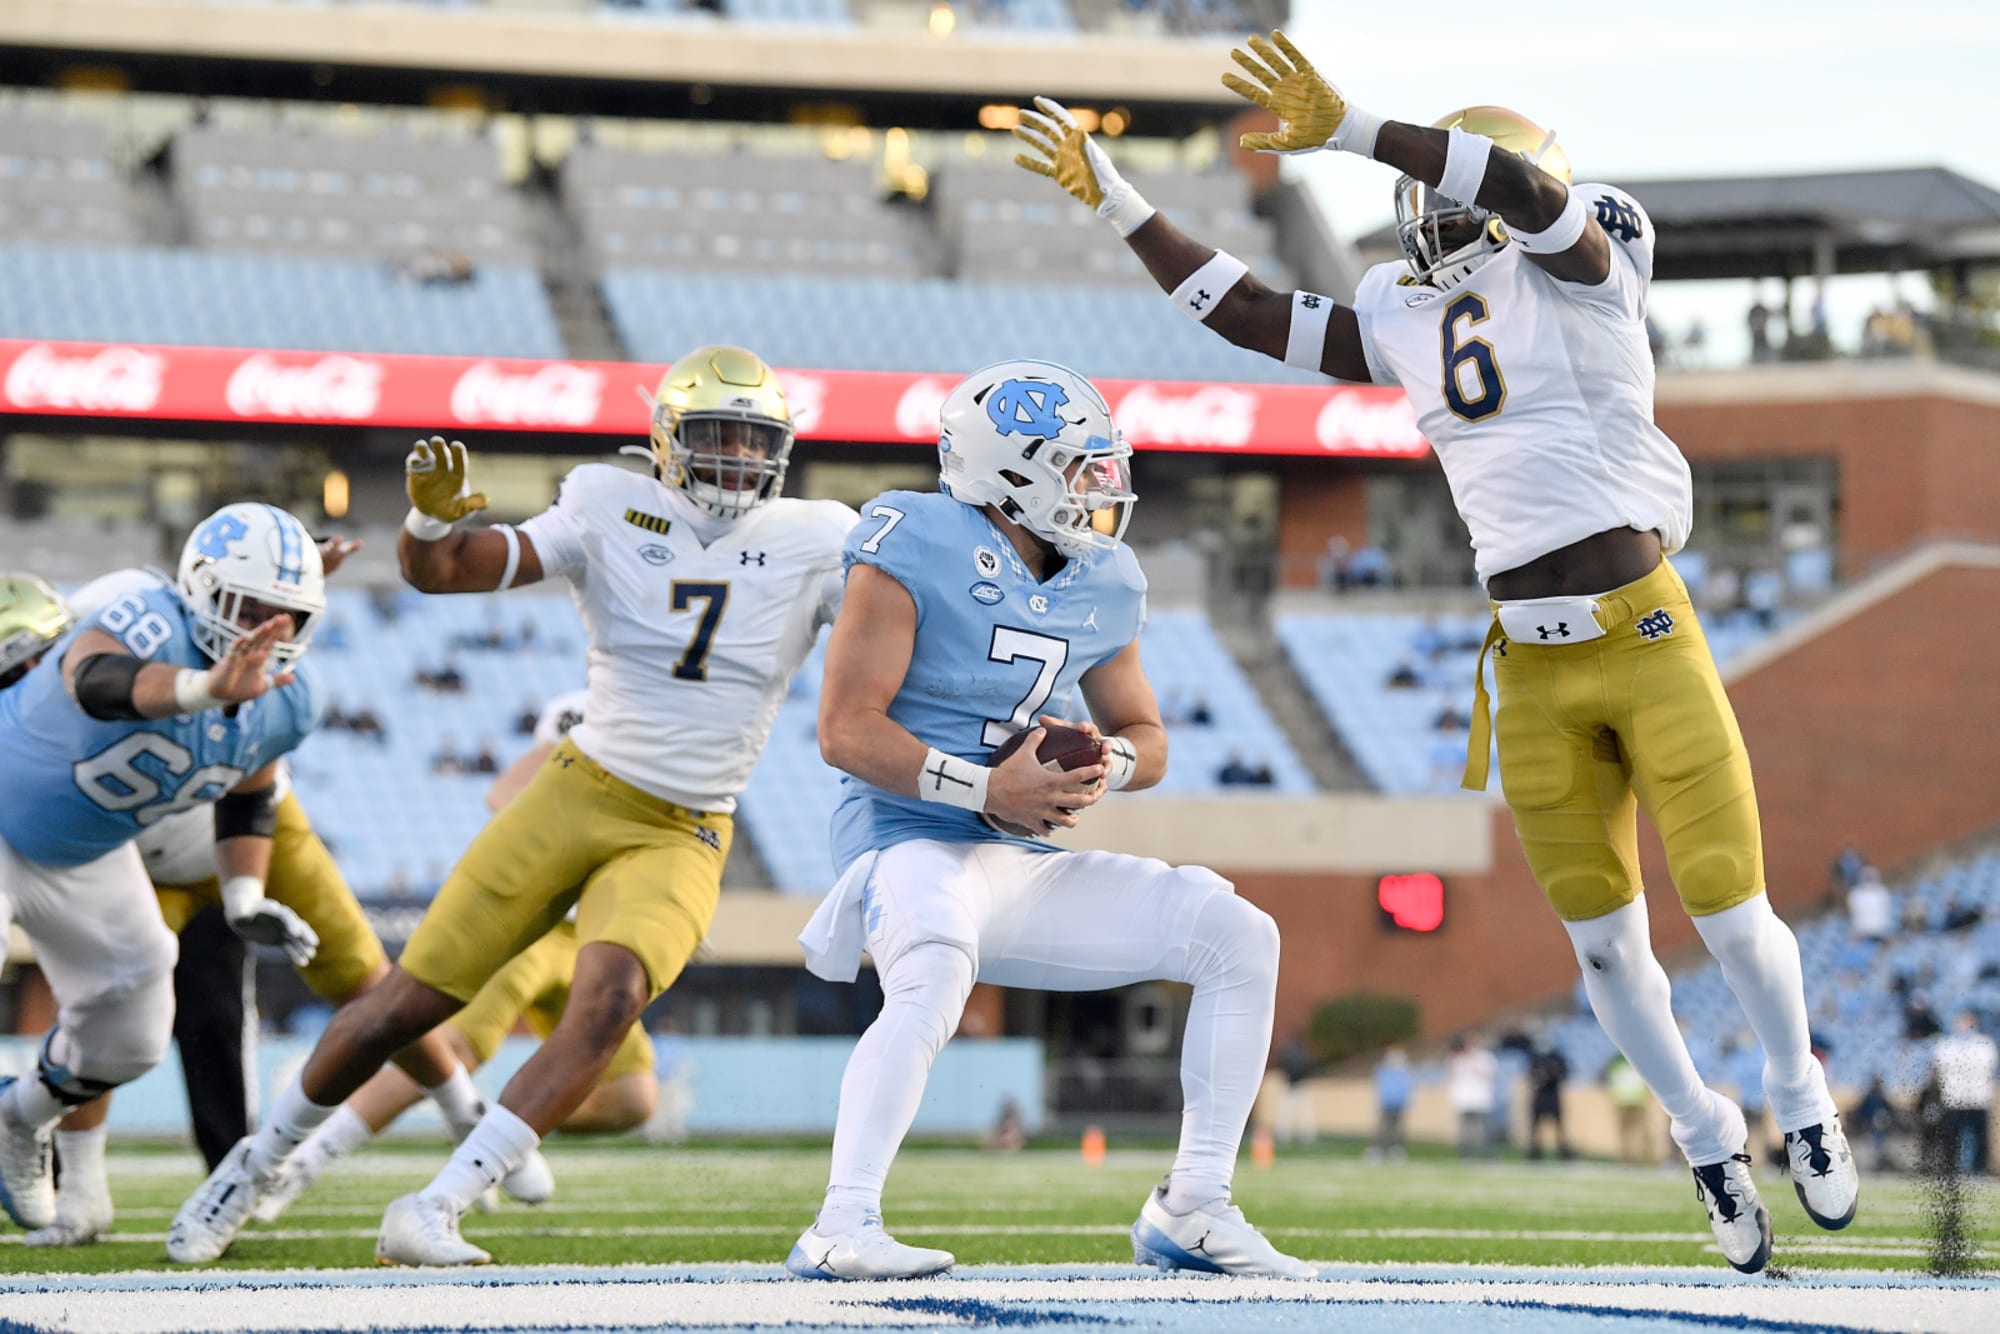 Notre Dame football Defense will be tested in a big way vs UNC